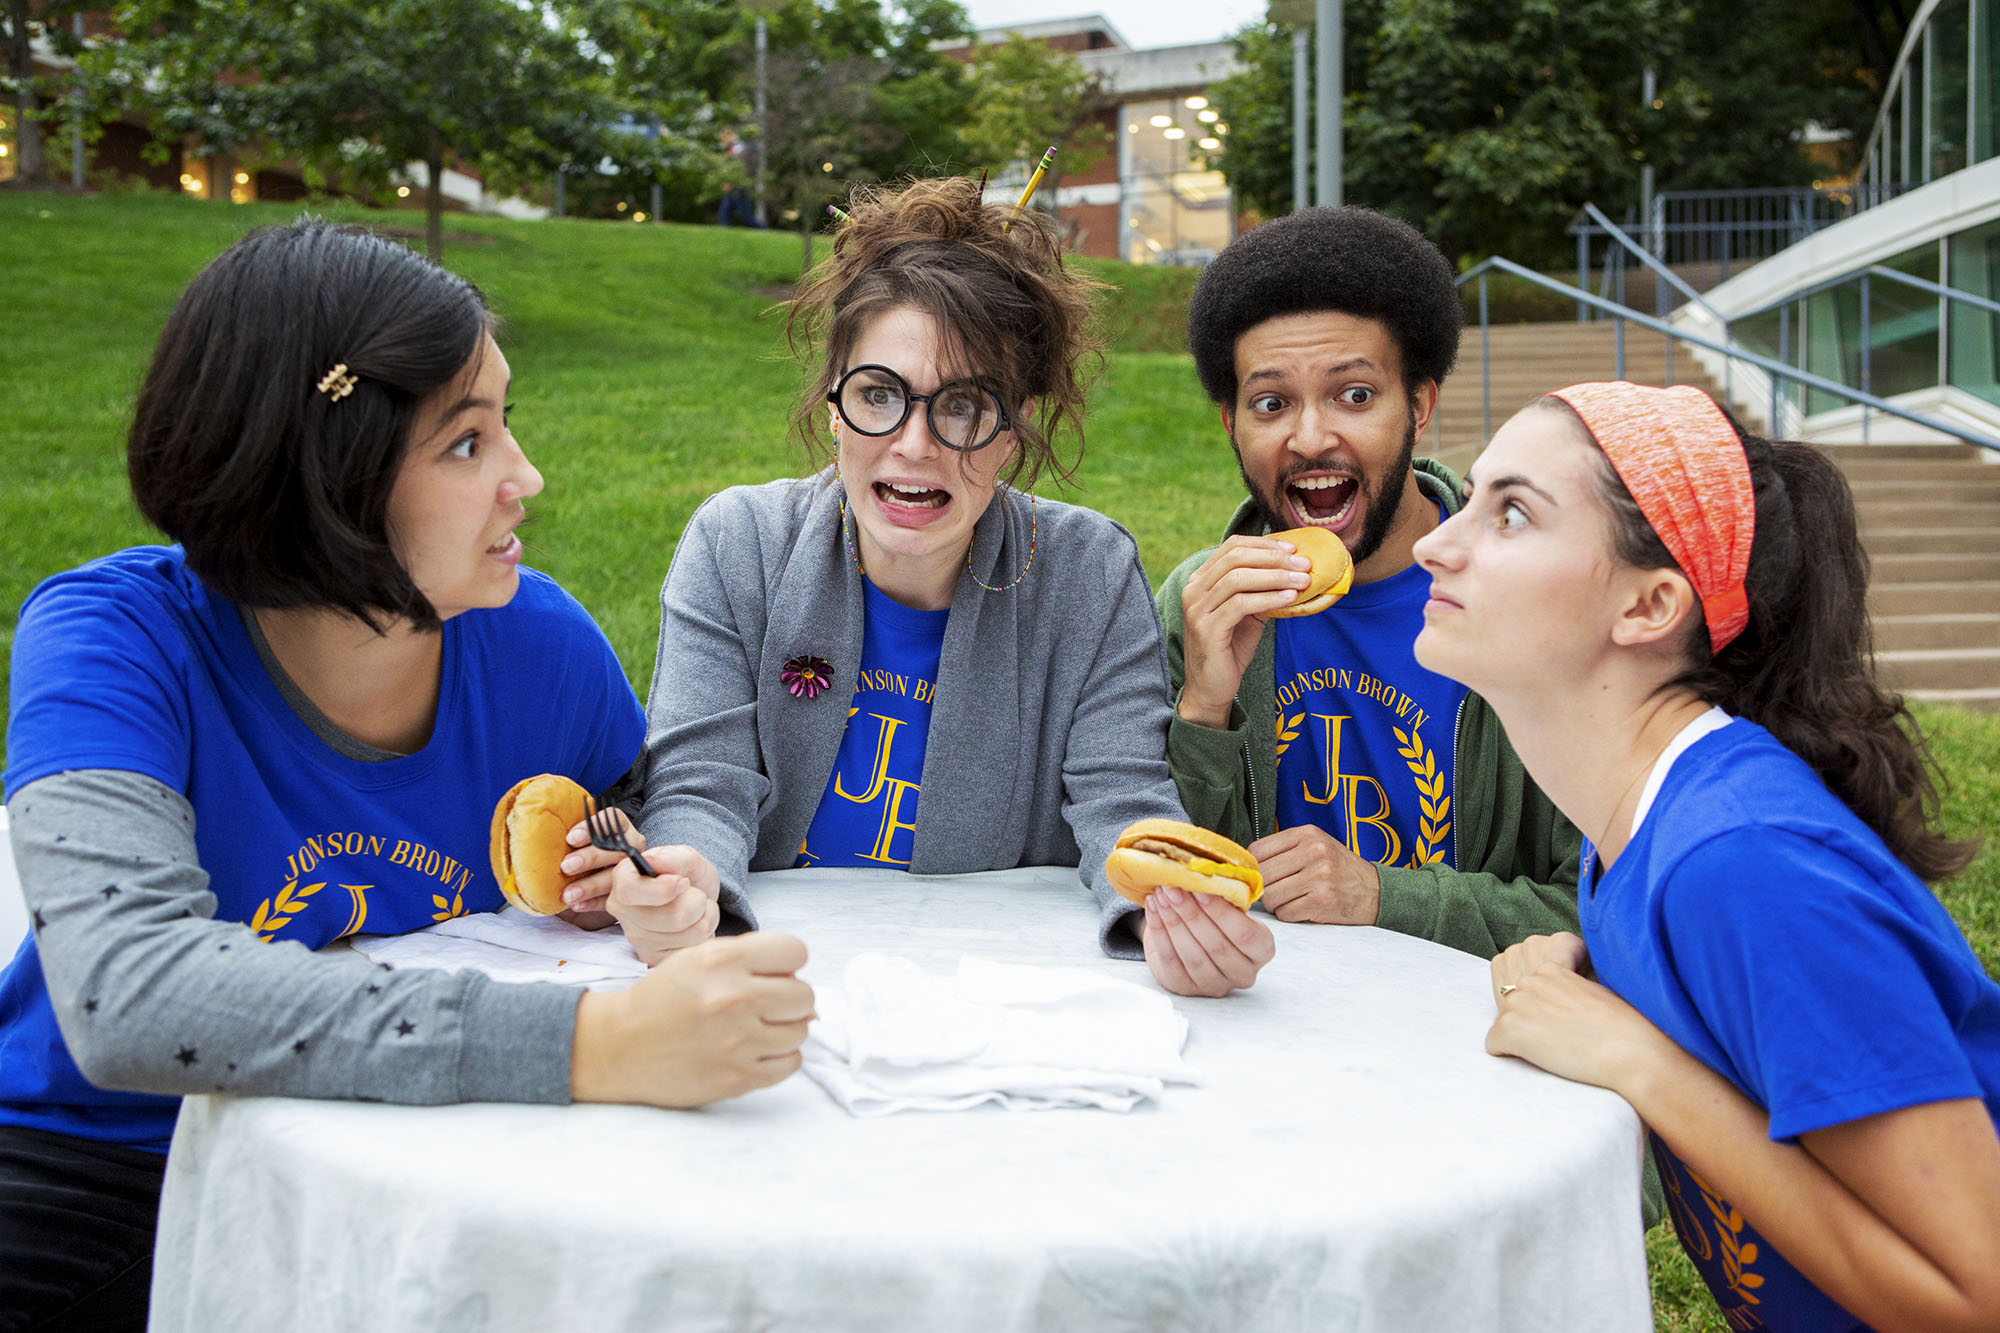 UVA drama club members sitting at a table with dramatic expressions eating cheeseburgers